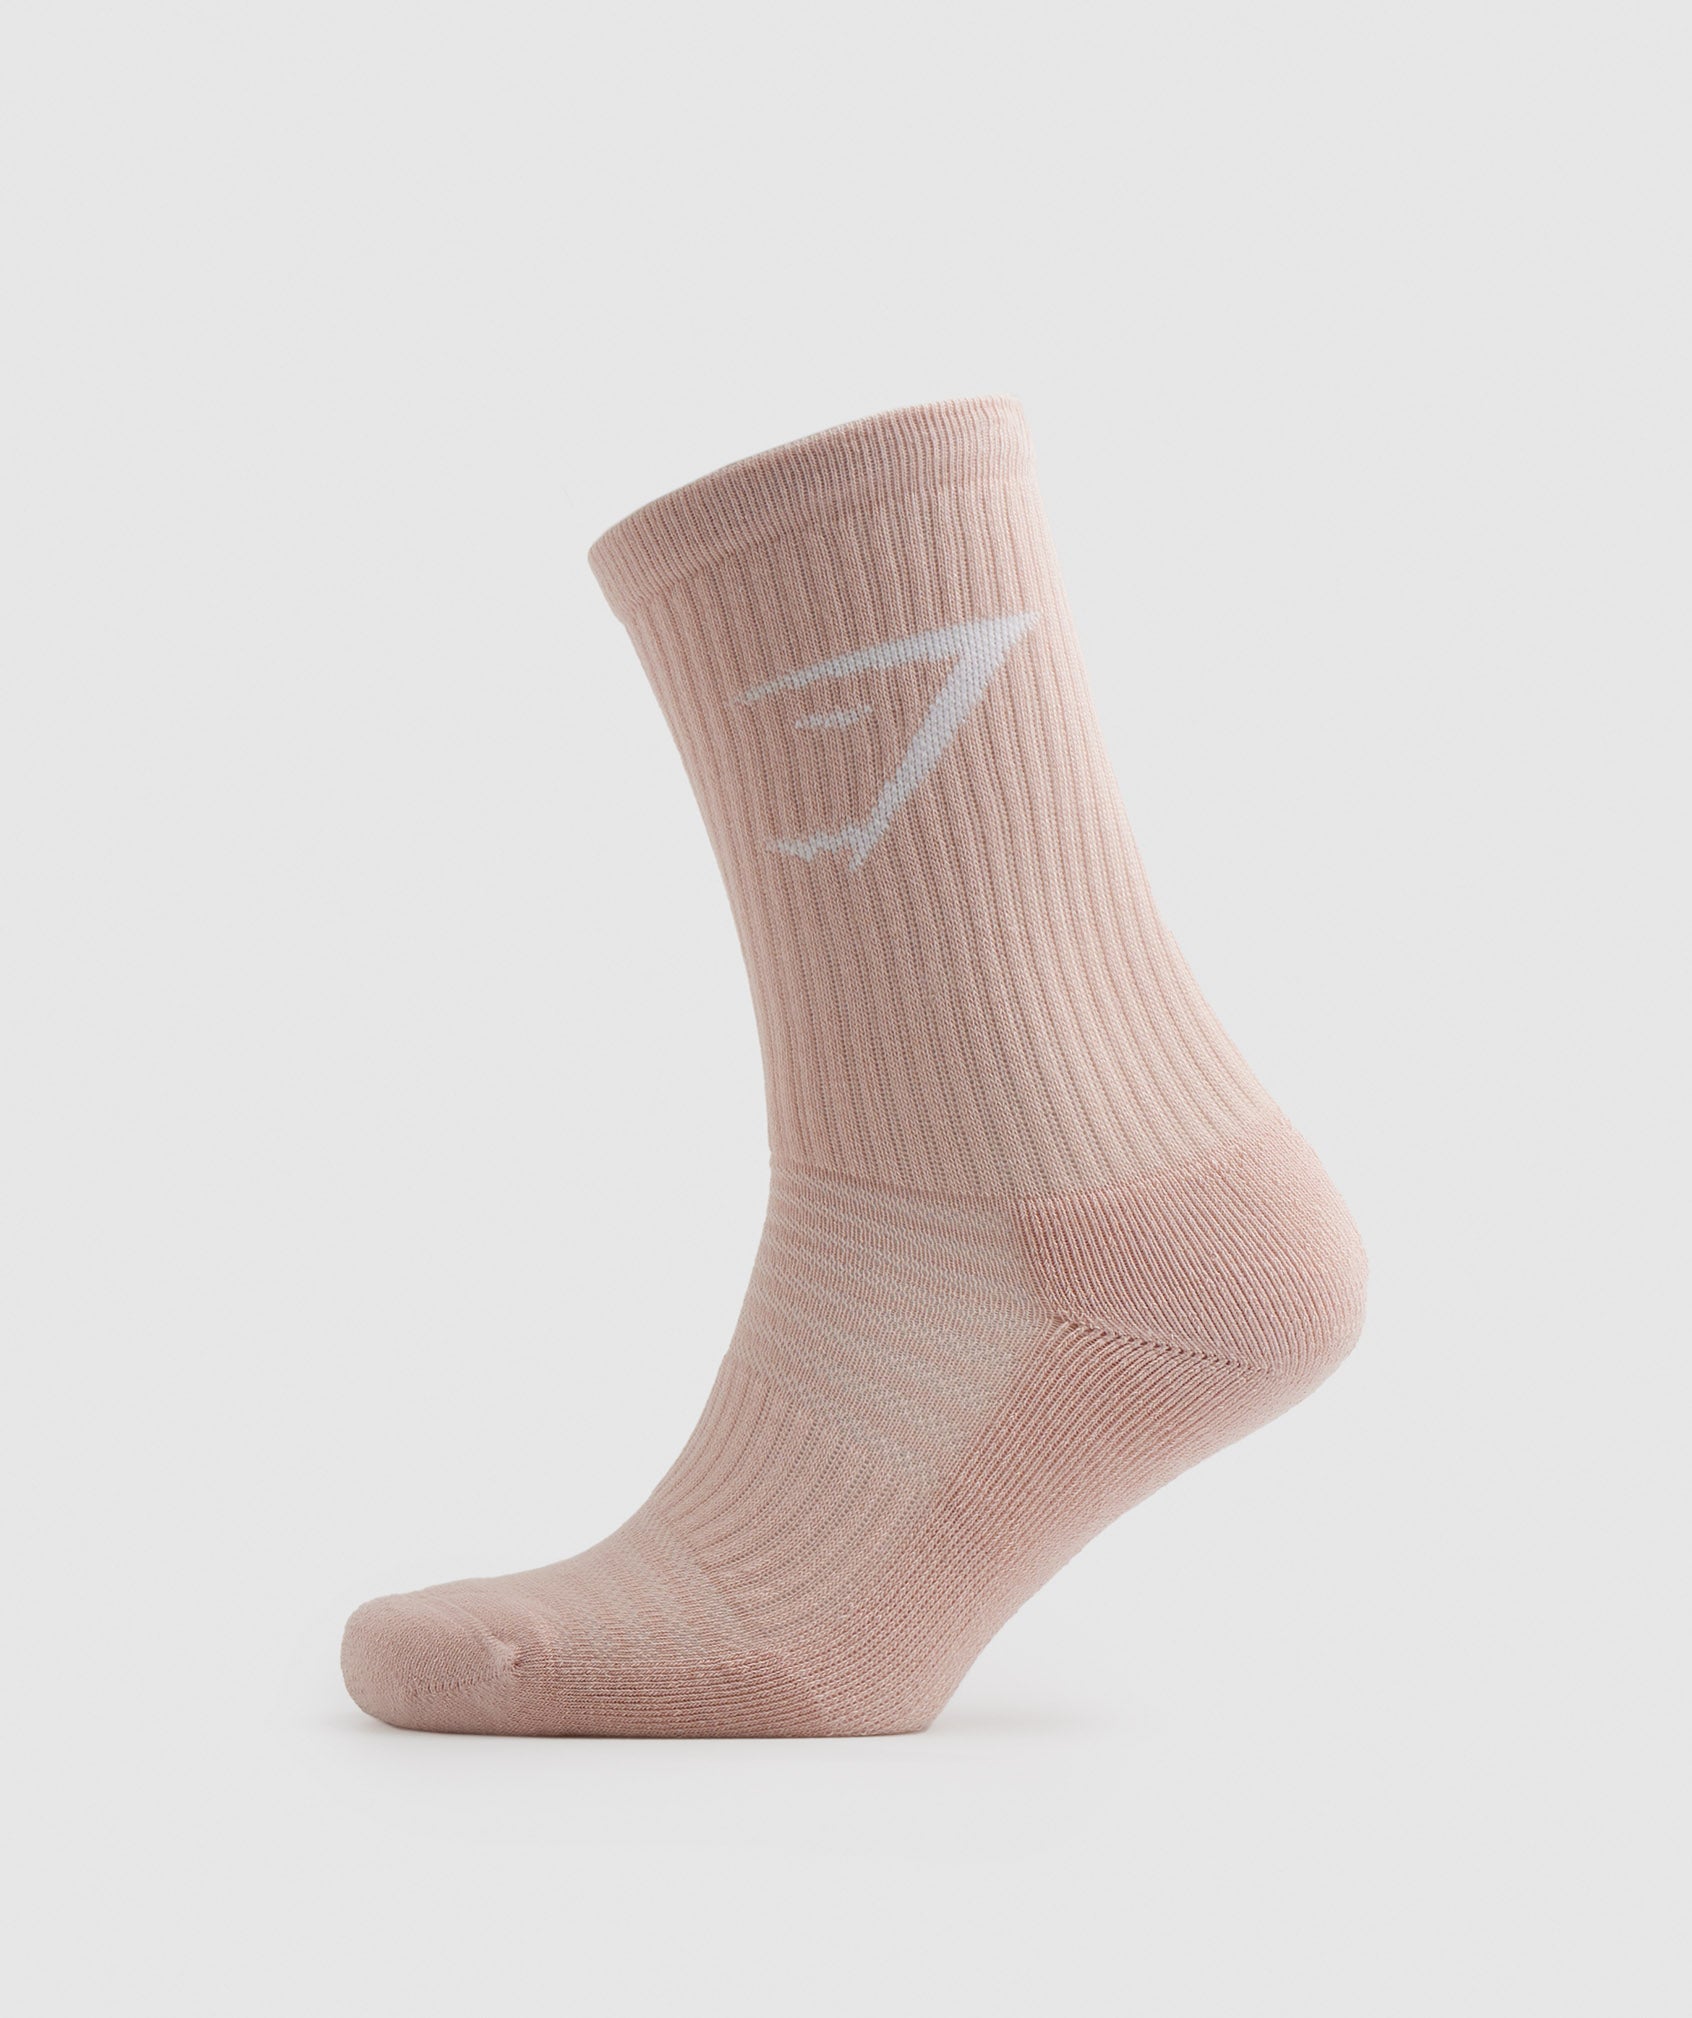 Crew Socks 3pk in White/Pink/Red - view 6